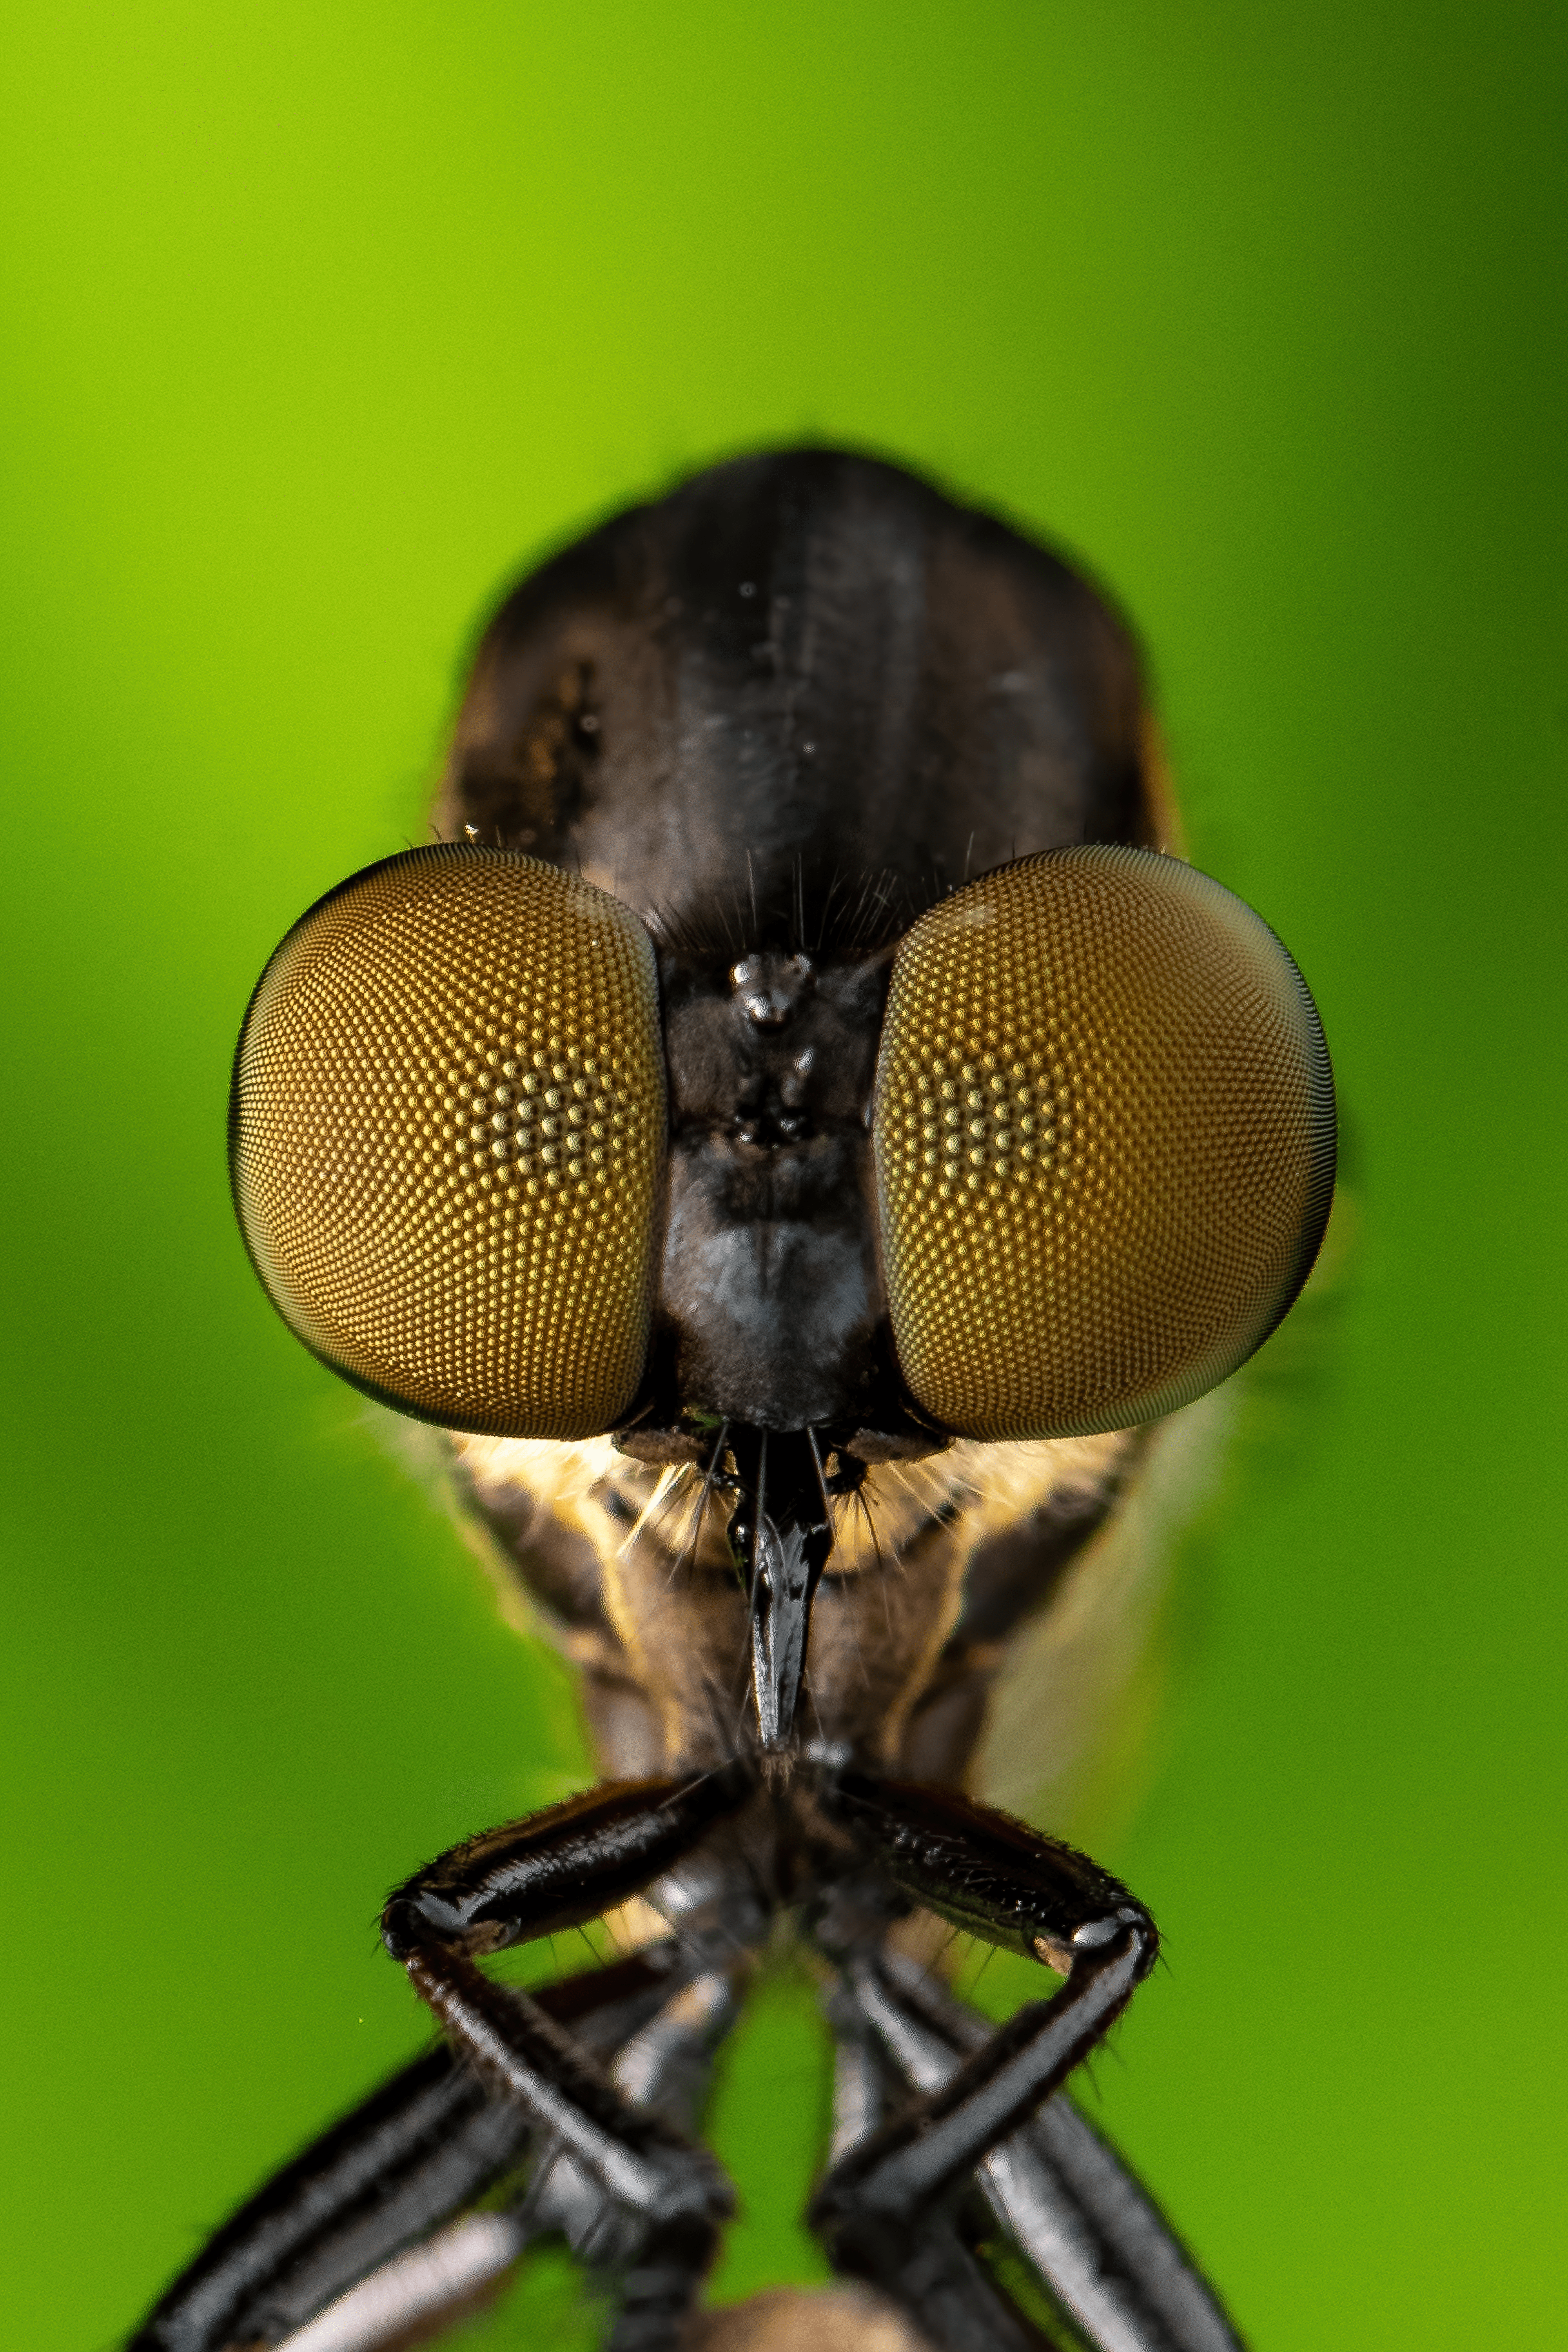 The Thousand Eyes of a RobberFly